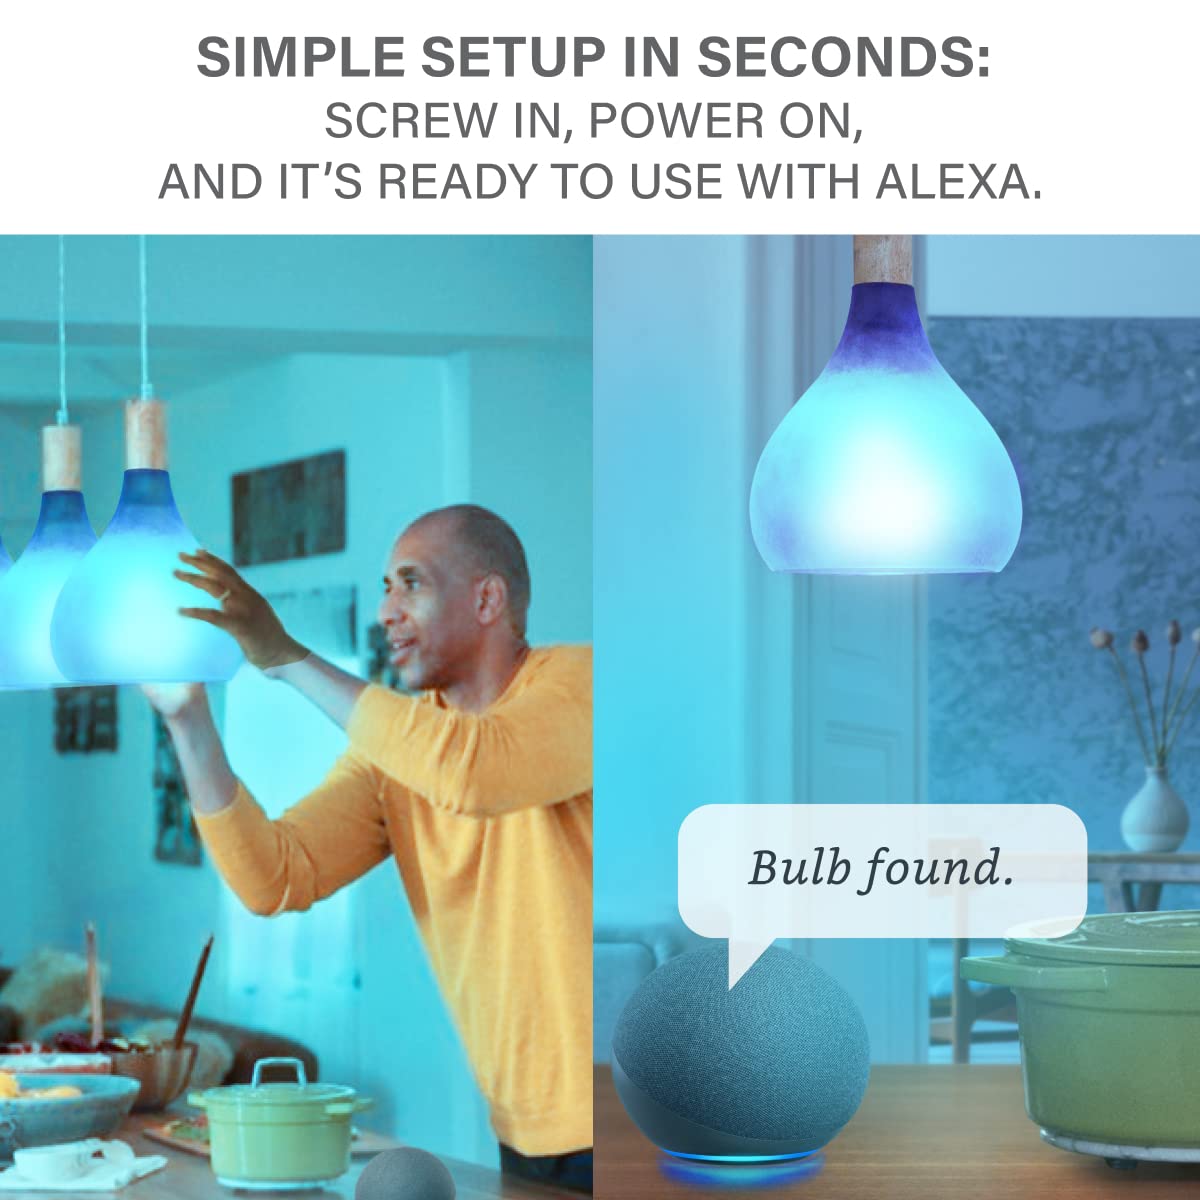 Sengled Alexa Light Bulb, S1 Auto Pairing with Alexa Devices, Color Changing Light Bulbs, Smart Light Bulbs that Work with Alexa, Bluetooth Mesh Smart Home Lighting, E26 60W Equivalent, 800LM, 2-Pack